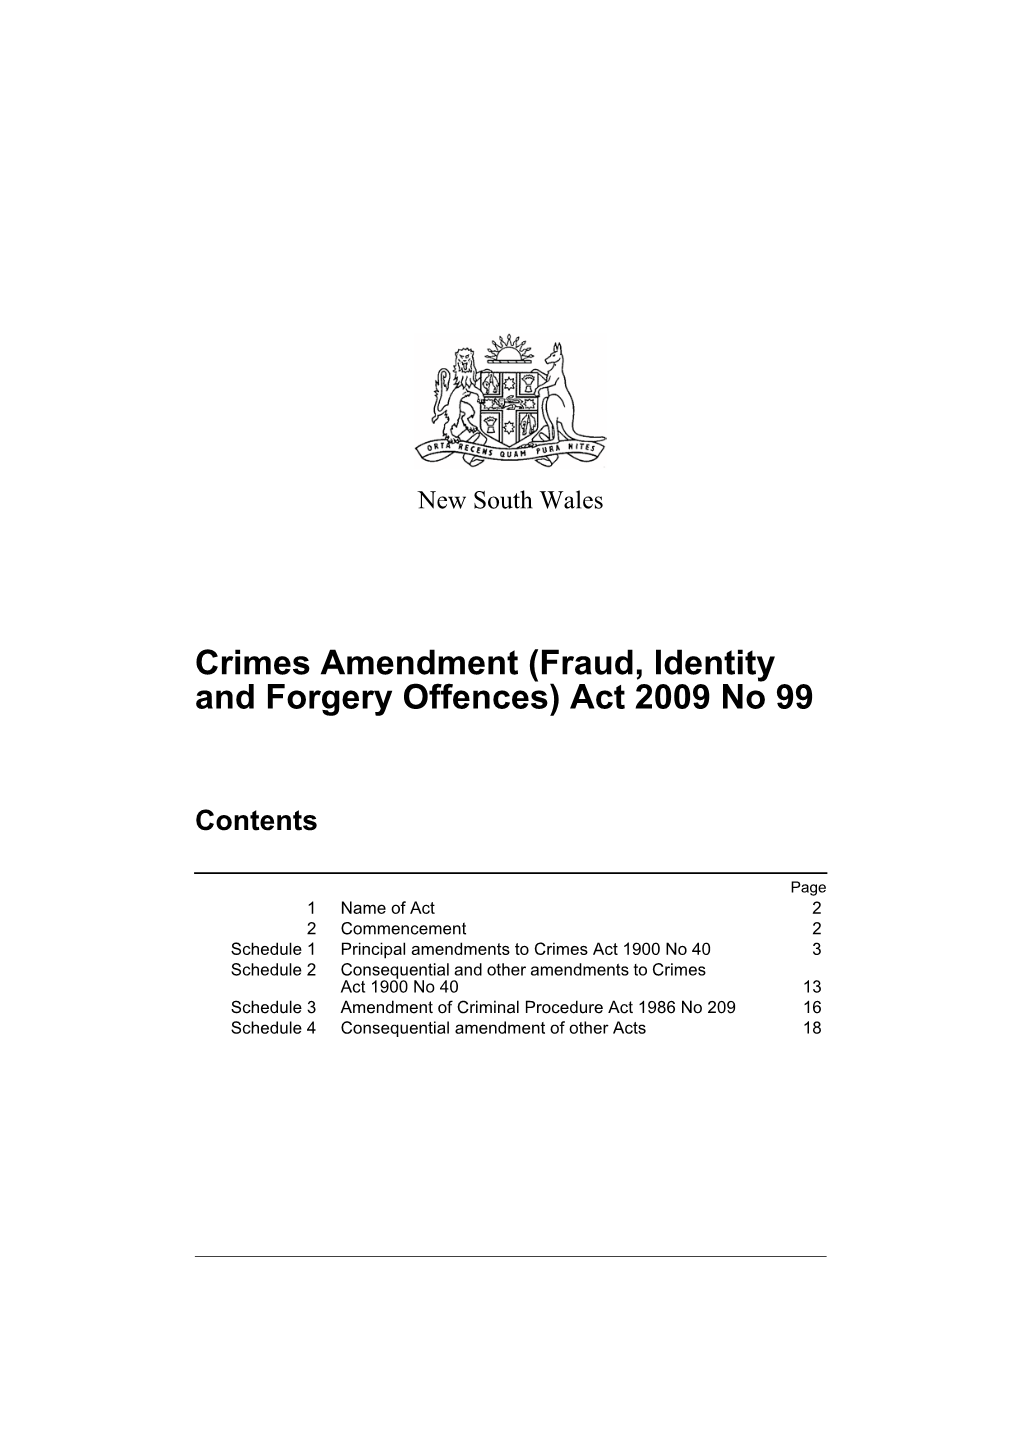 Crimes Amendment (Fraud, Identity and Forgery Offences) Act 2009 No 99